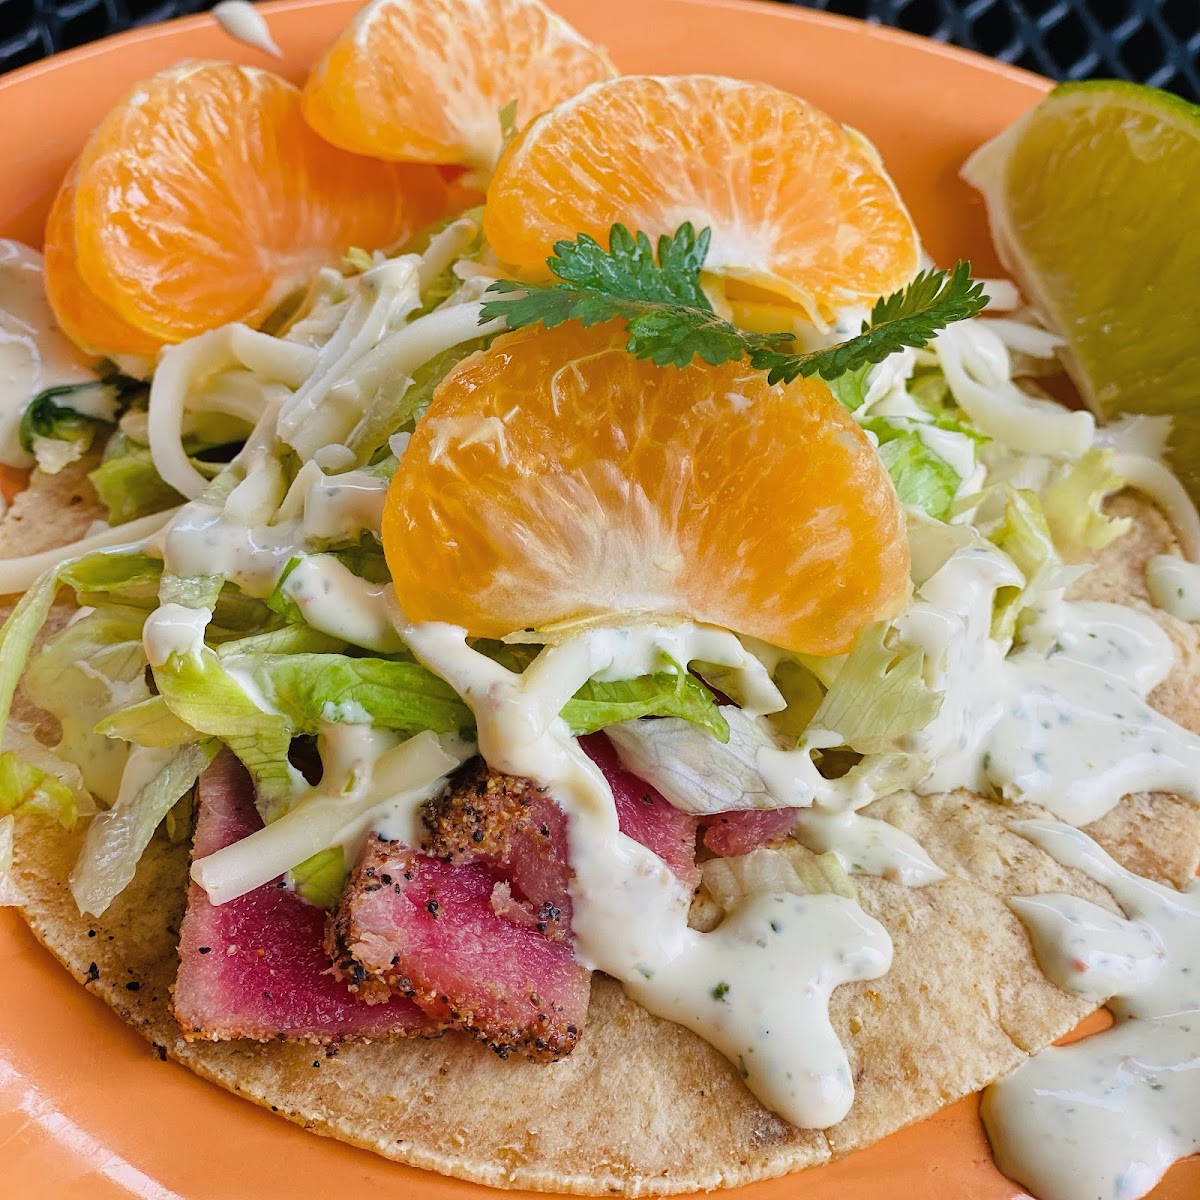 Pacific Rim Fish Taco.  Ahi tuna seared to perfection (can be cooked any preference) served on a GF corn tortilla.